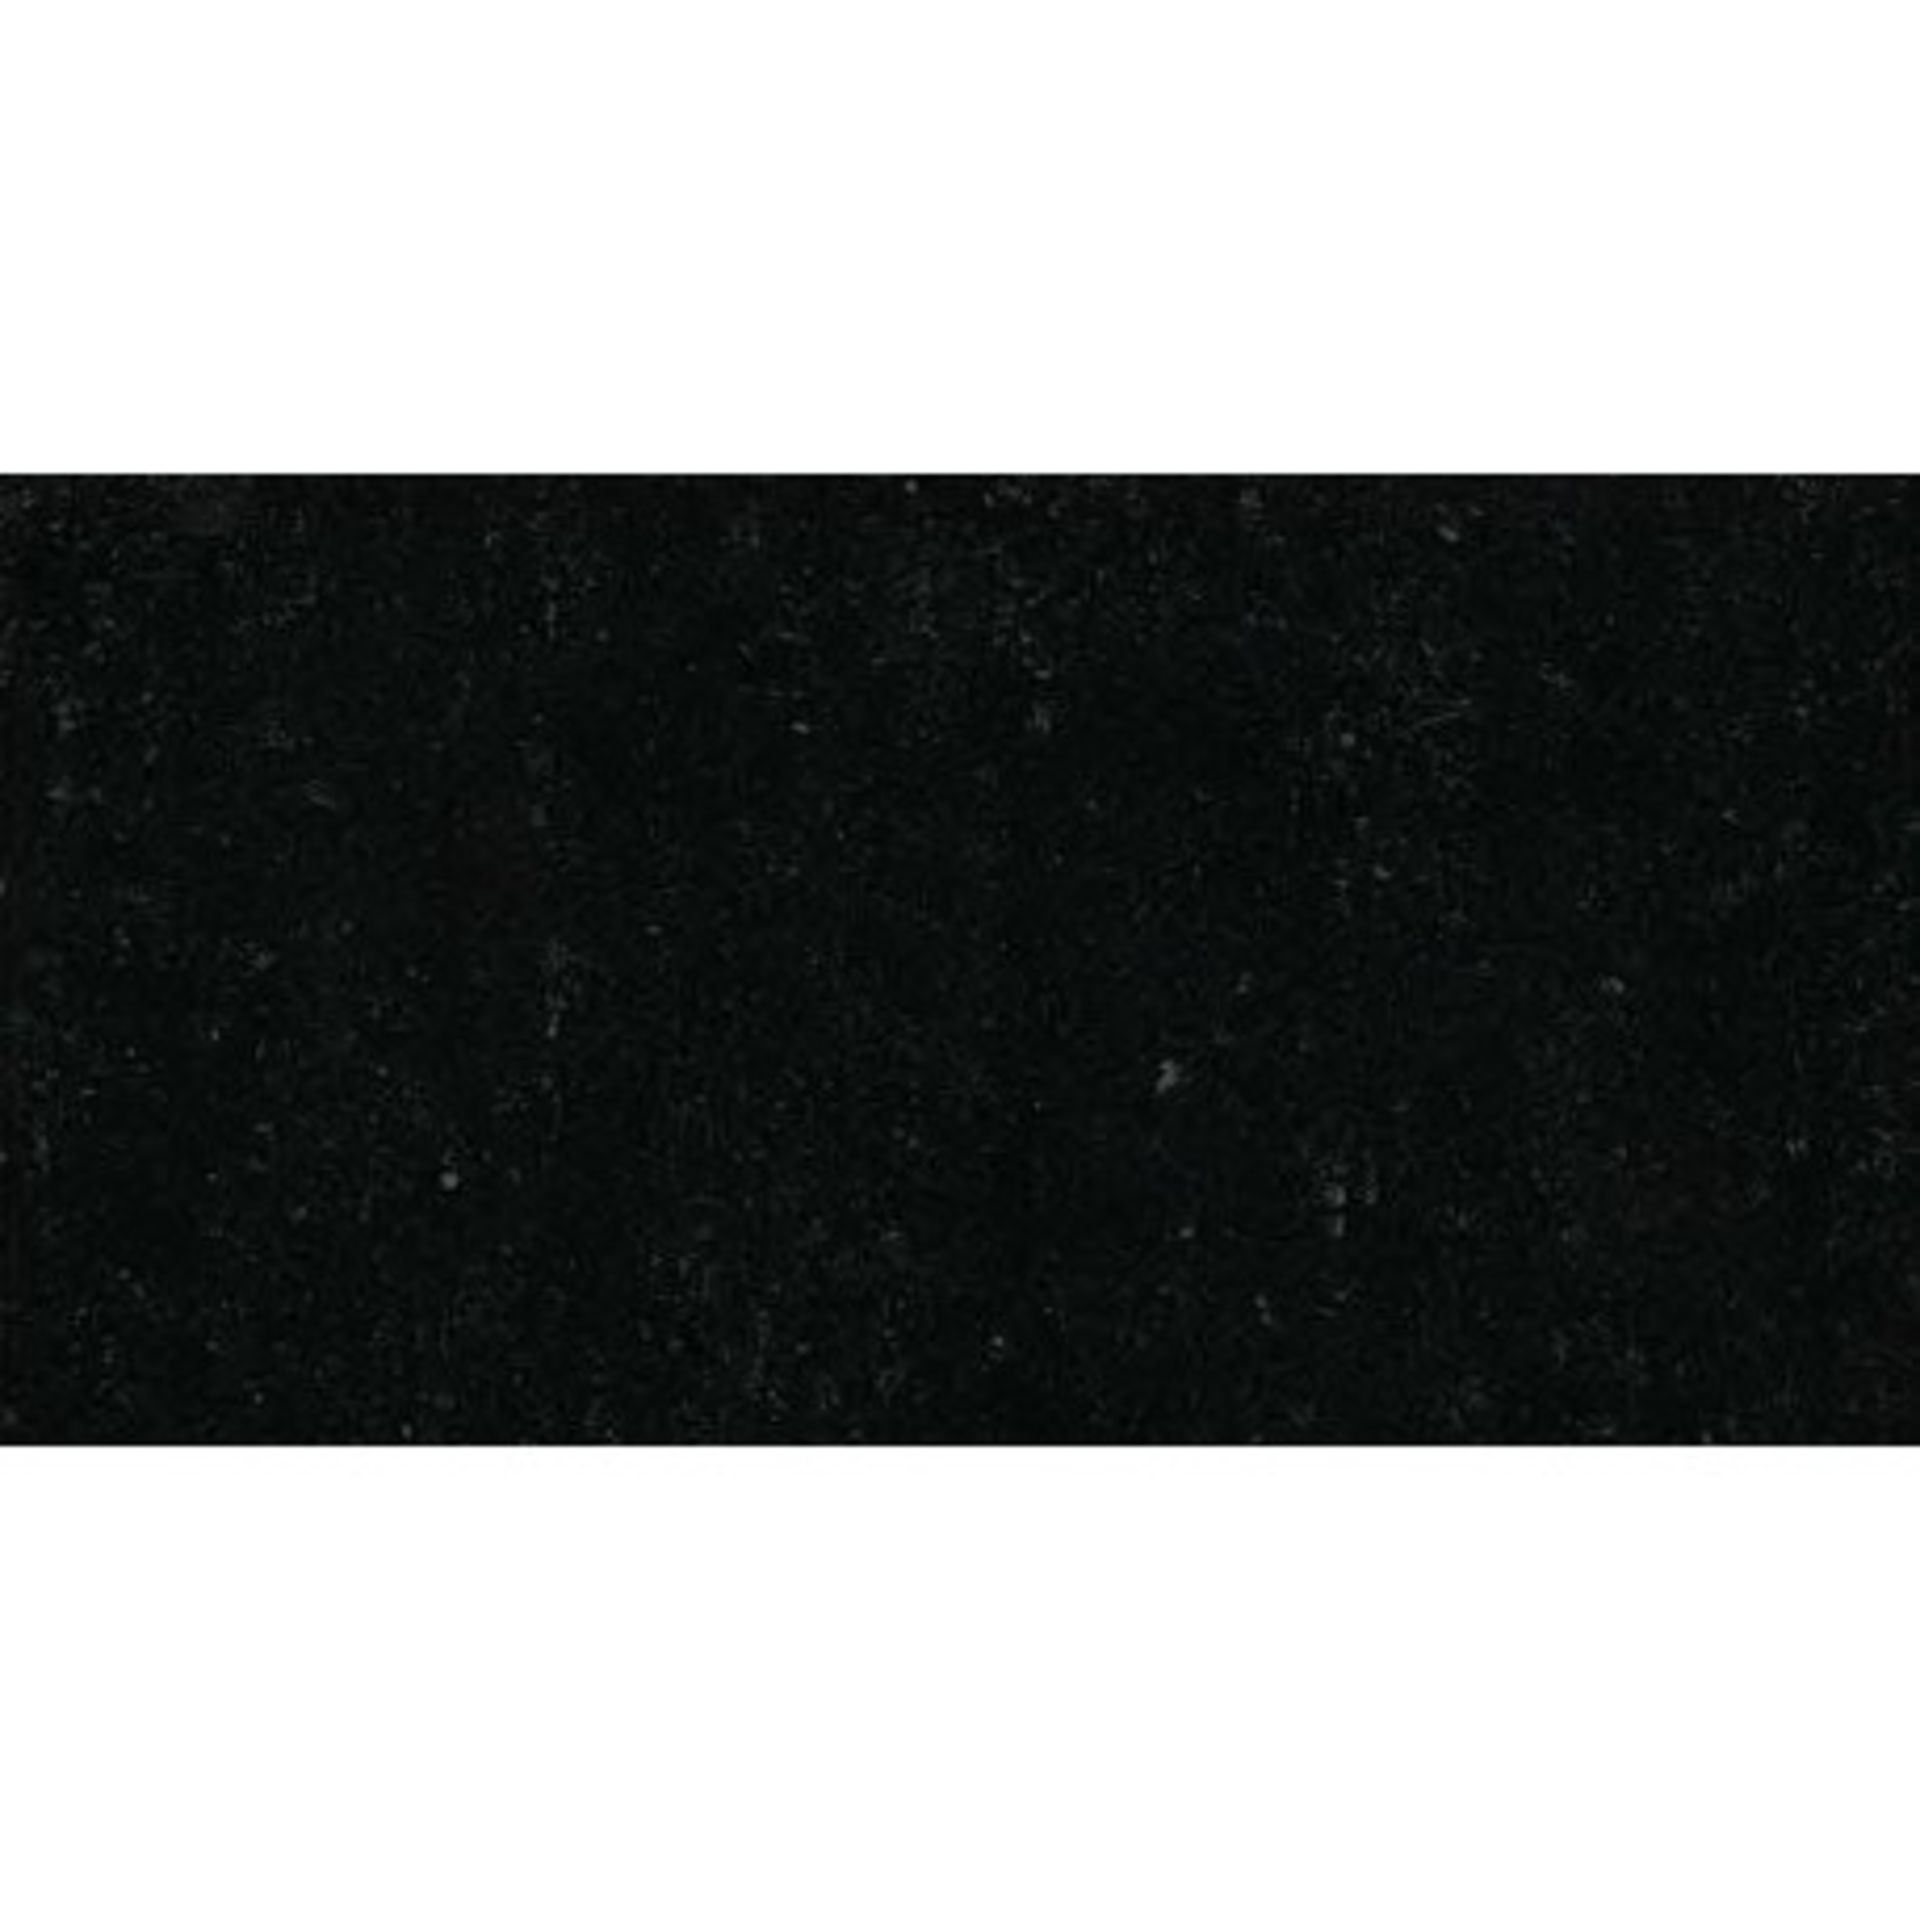 (CC4) 4.7m2 Black Galaxy Granite Floor and Wall Tiles. Exceptional features, sophisticated app...